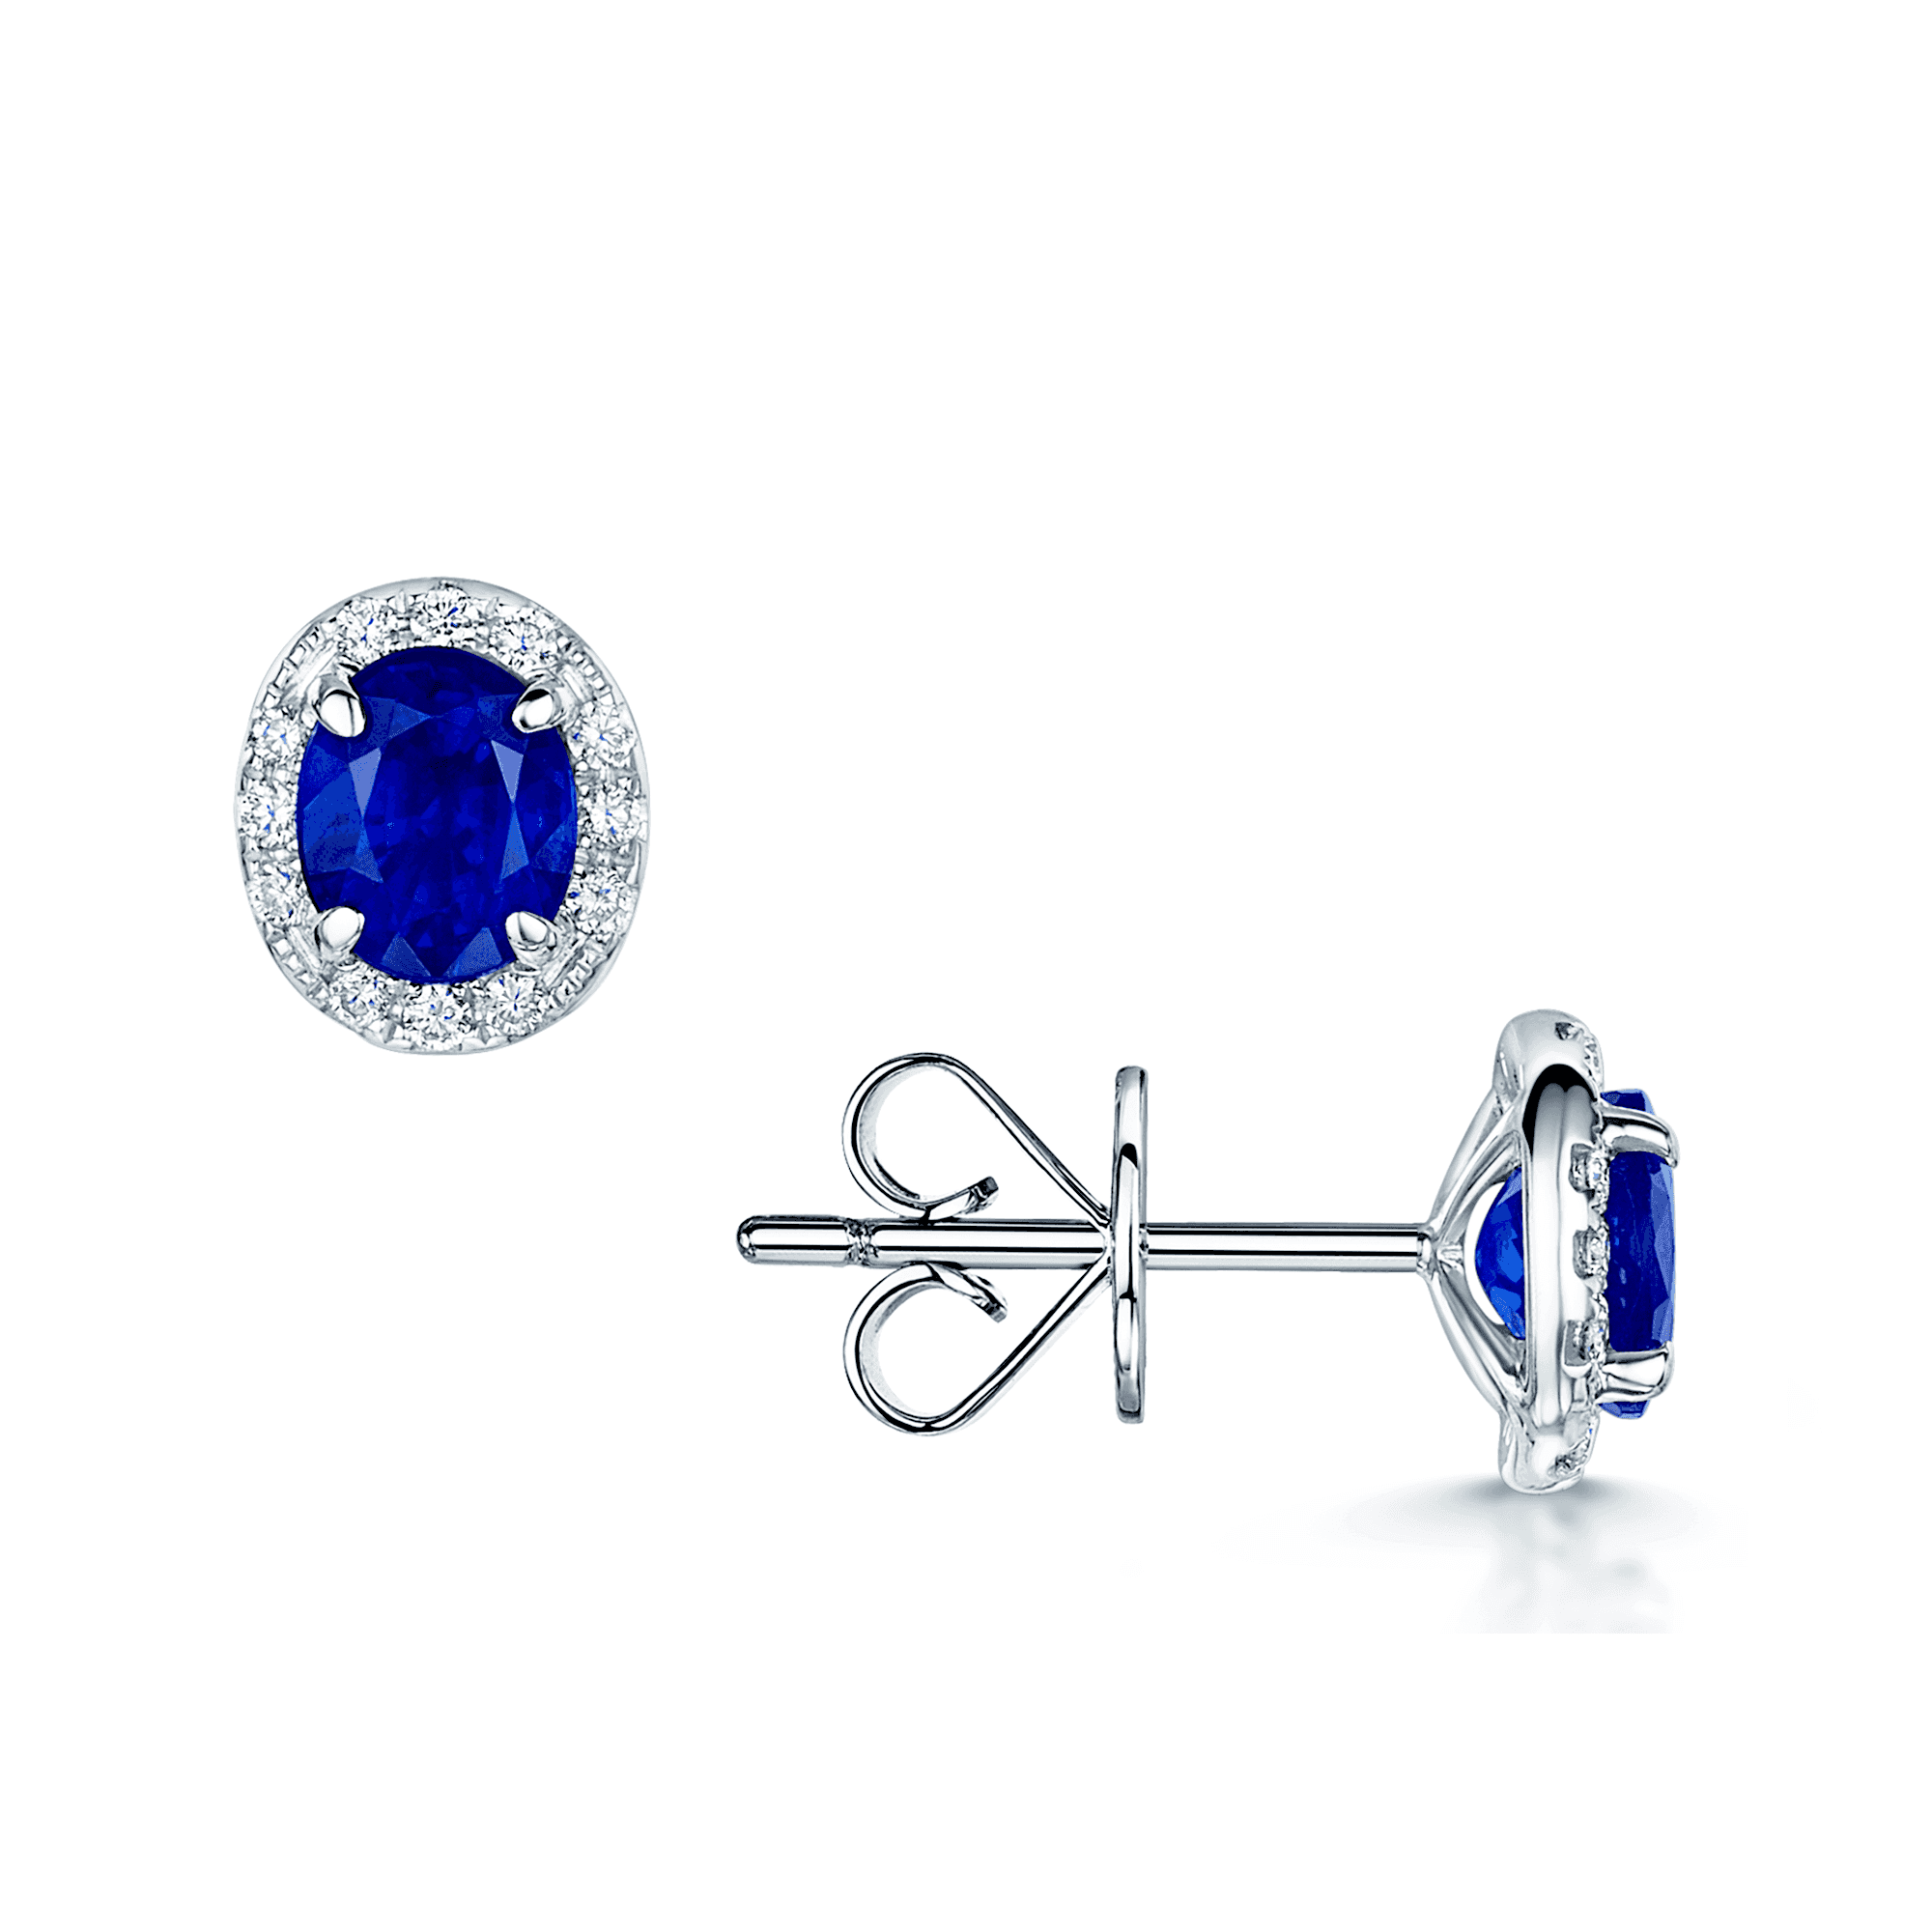 18ct White Gold Oval Sapphire And Diamond Halo Stud Earrings